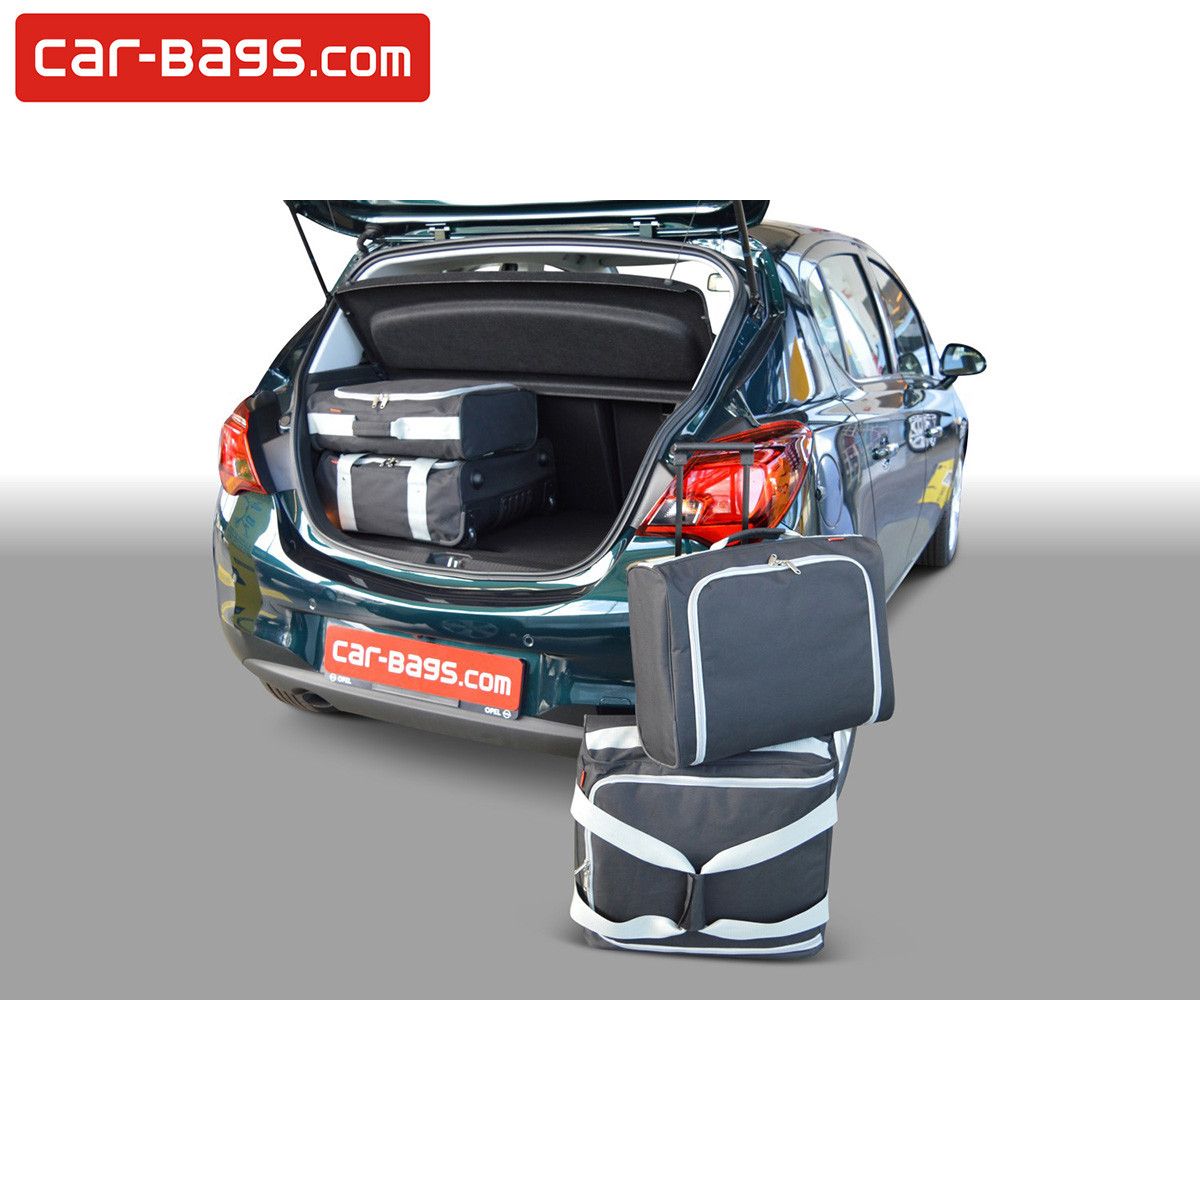 Travel bags fits Opel Corsa E tailor made (4 bags), Time and space saving  for $ 275, Perfect fit Car Bags